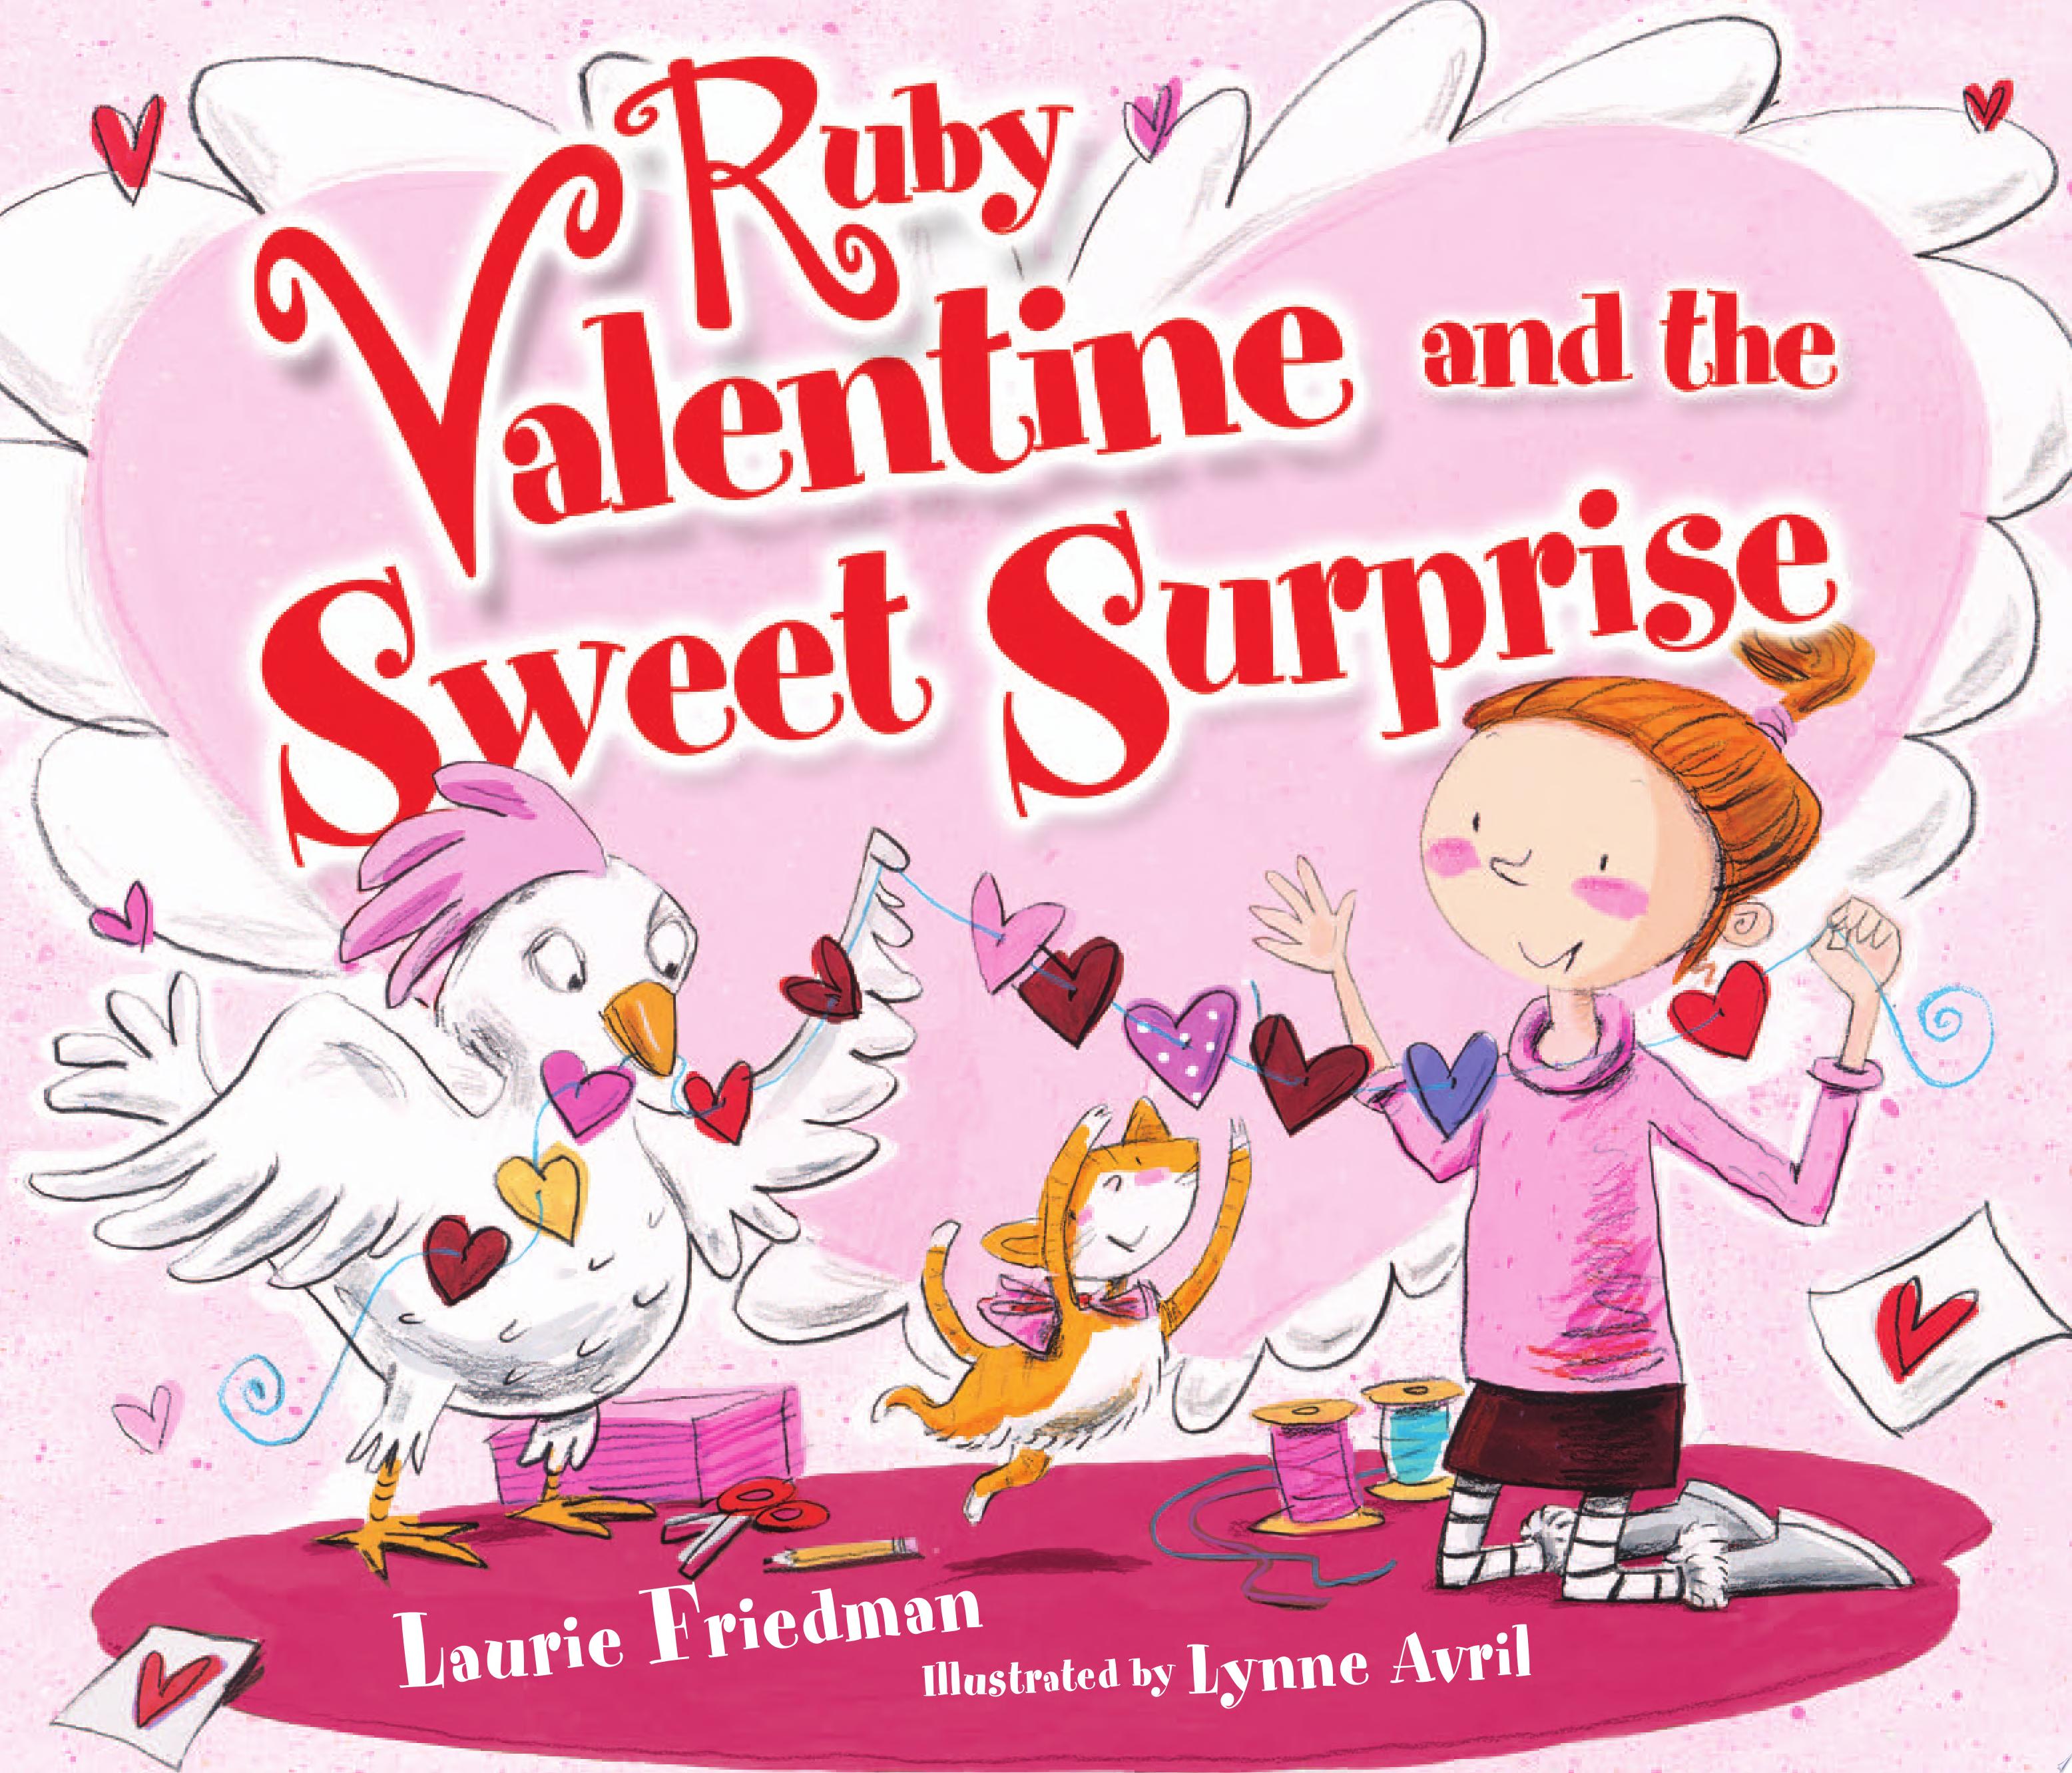 Image for "Ruby Valentine and the Sweet Surprise"